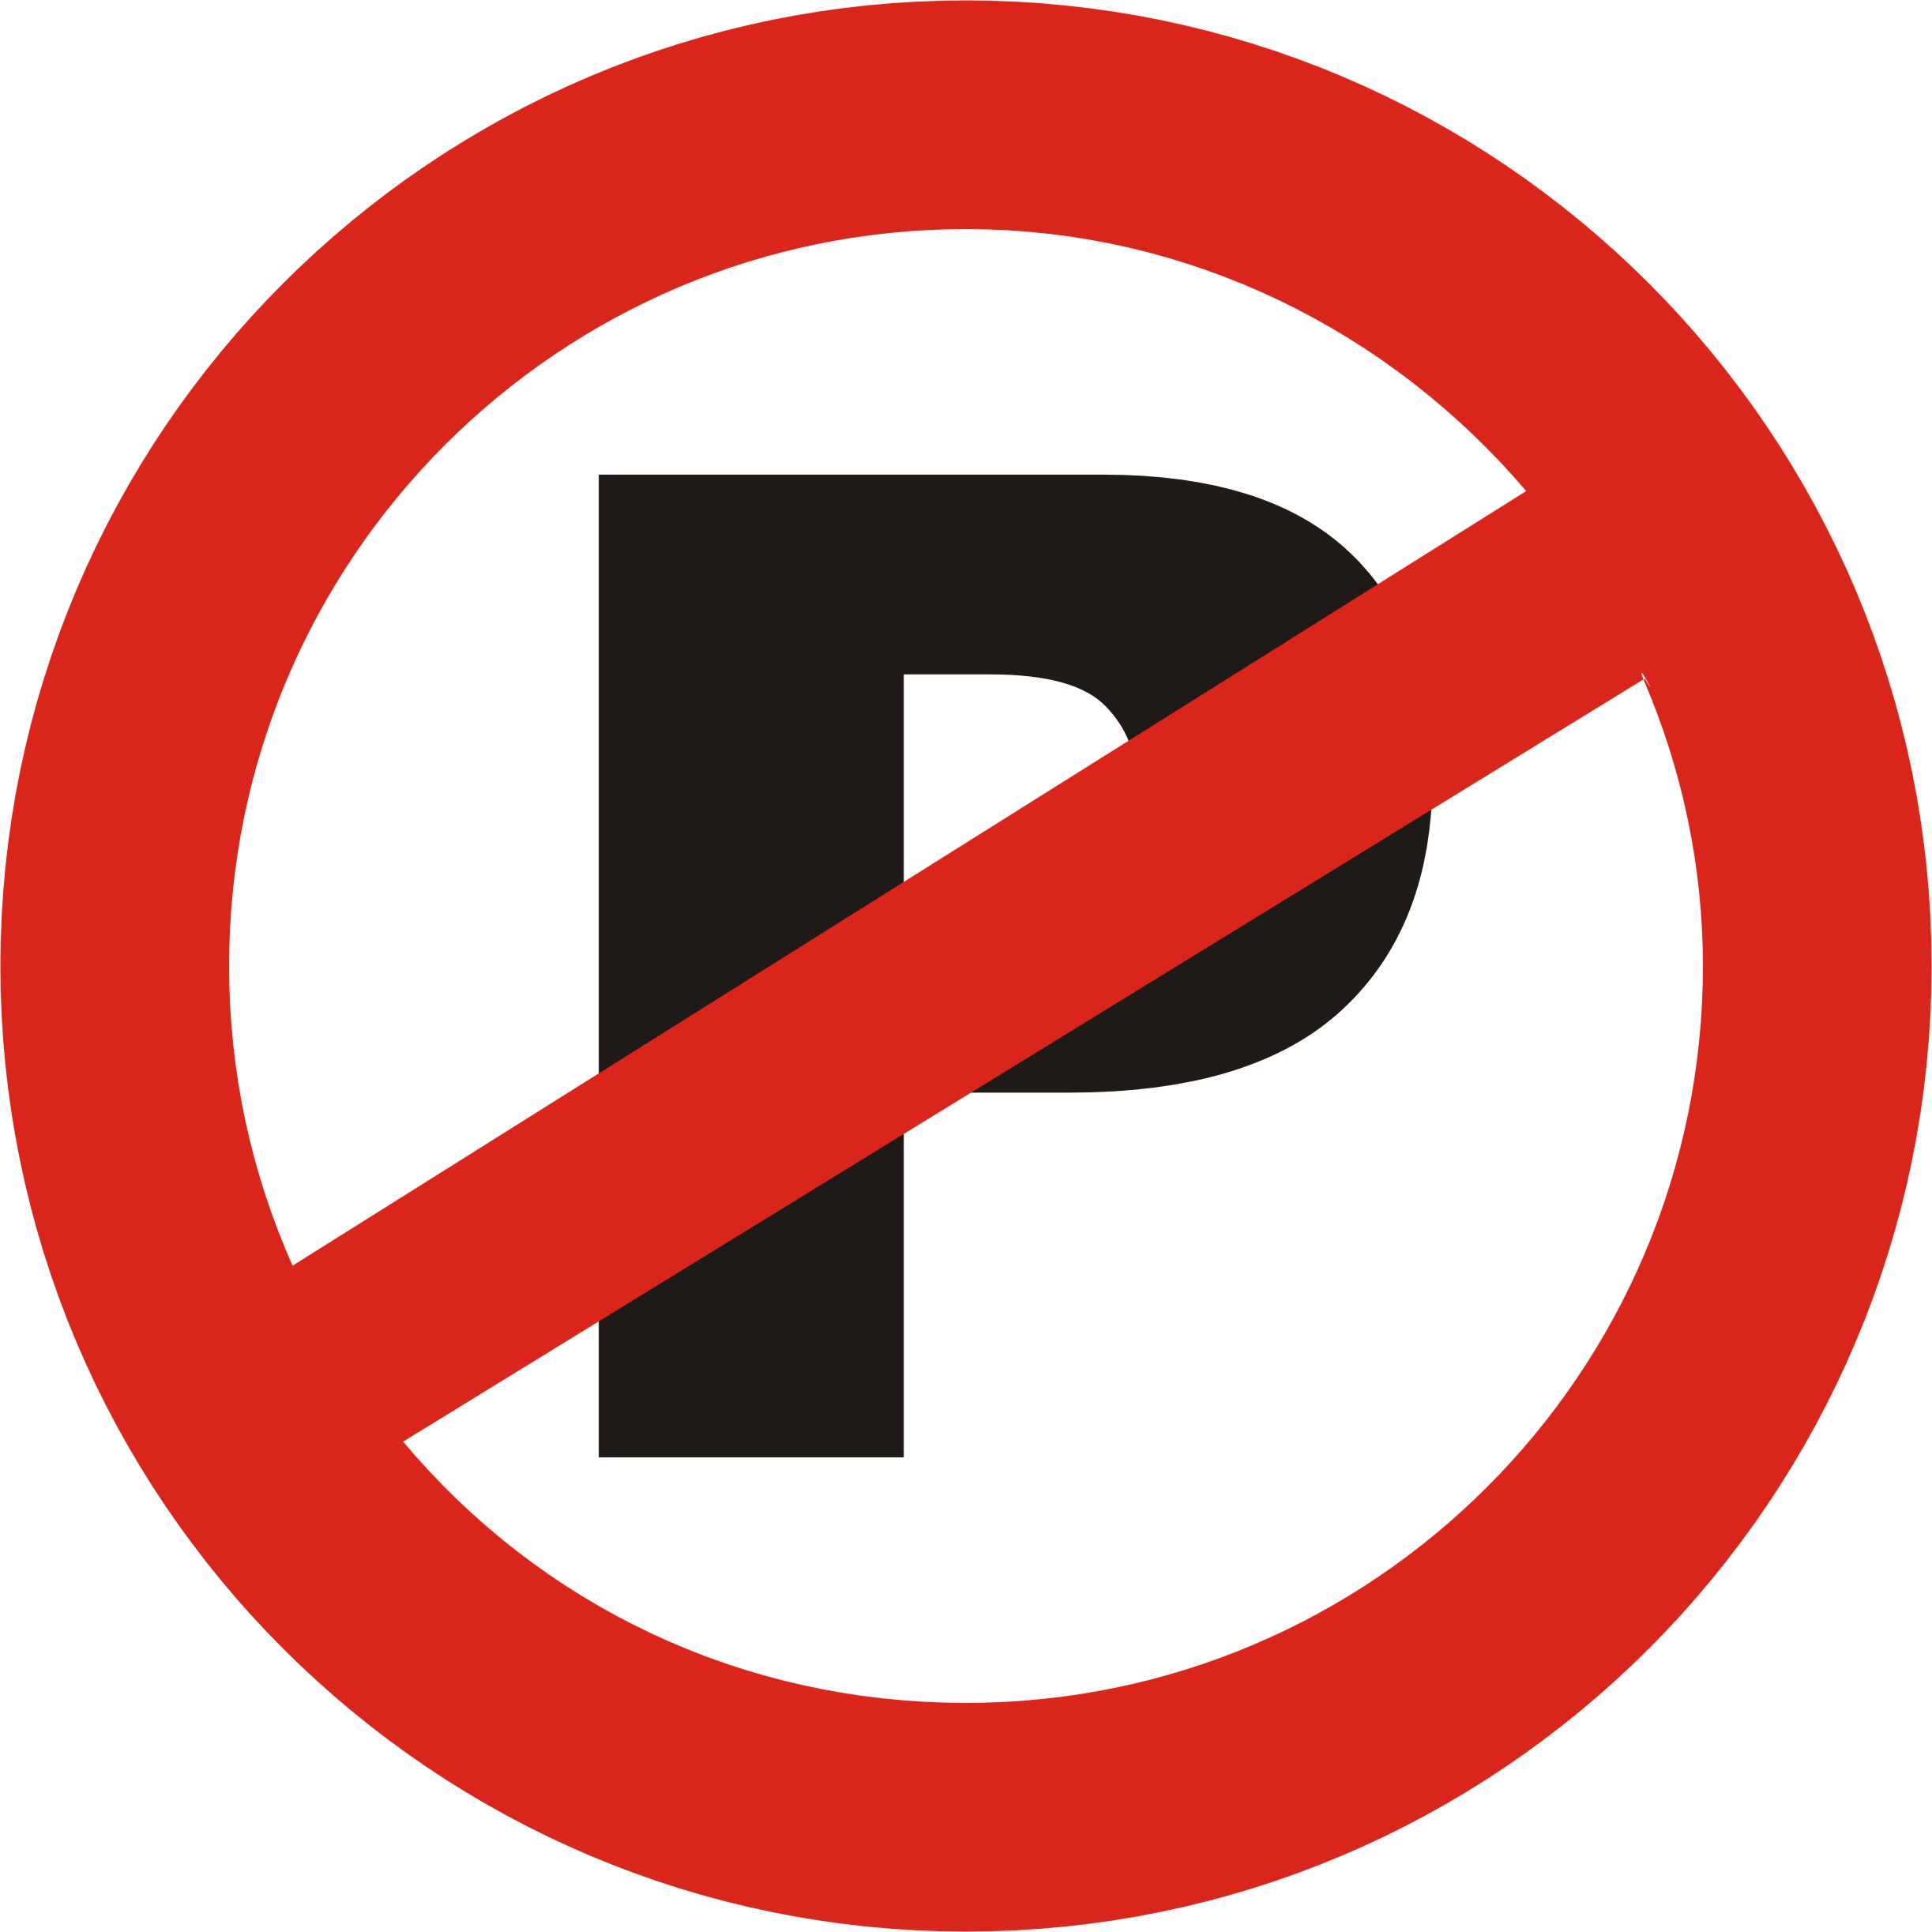 23 Printable No Parking Signs   Free Cliparts That You Can Download To